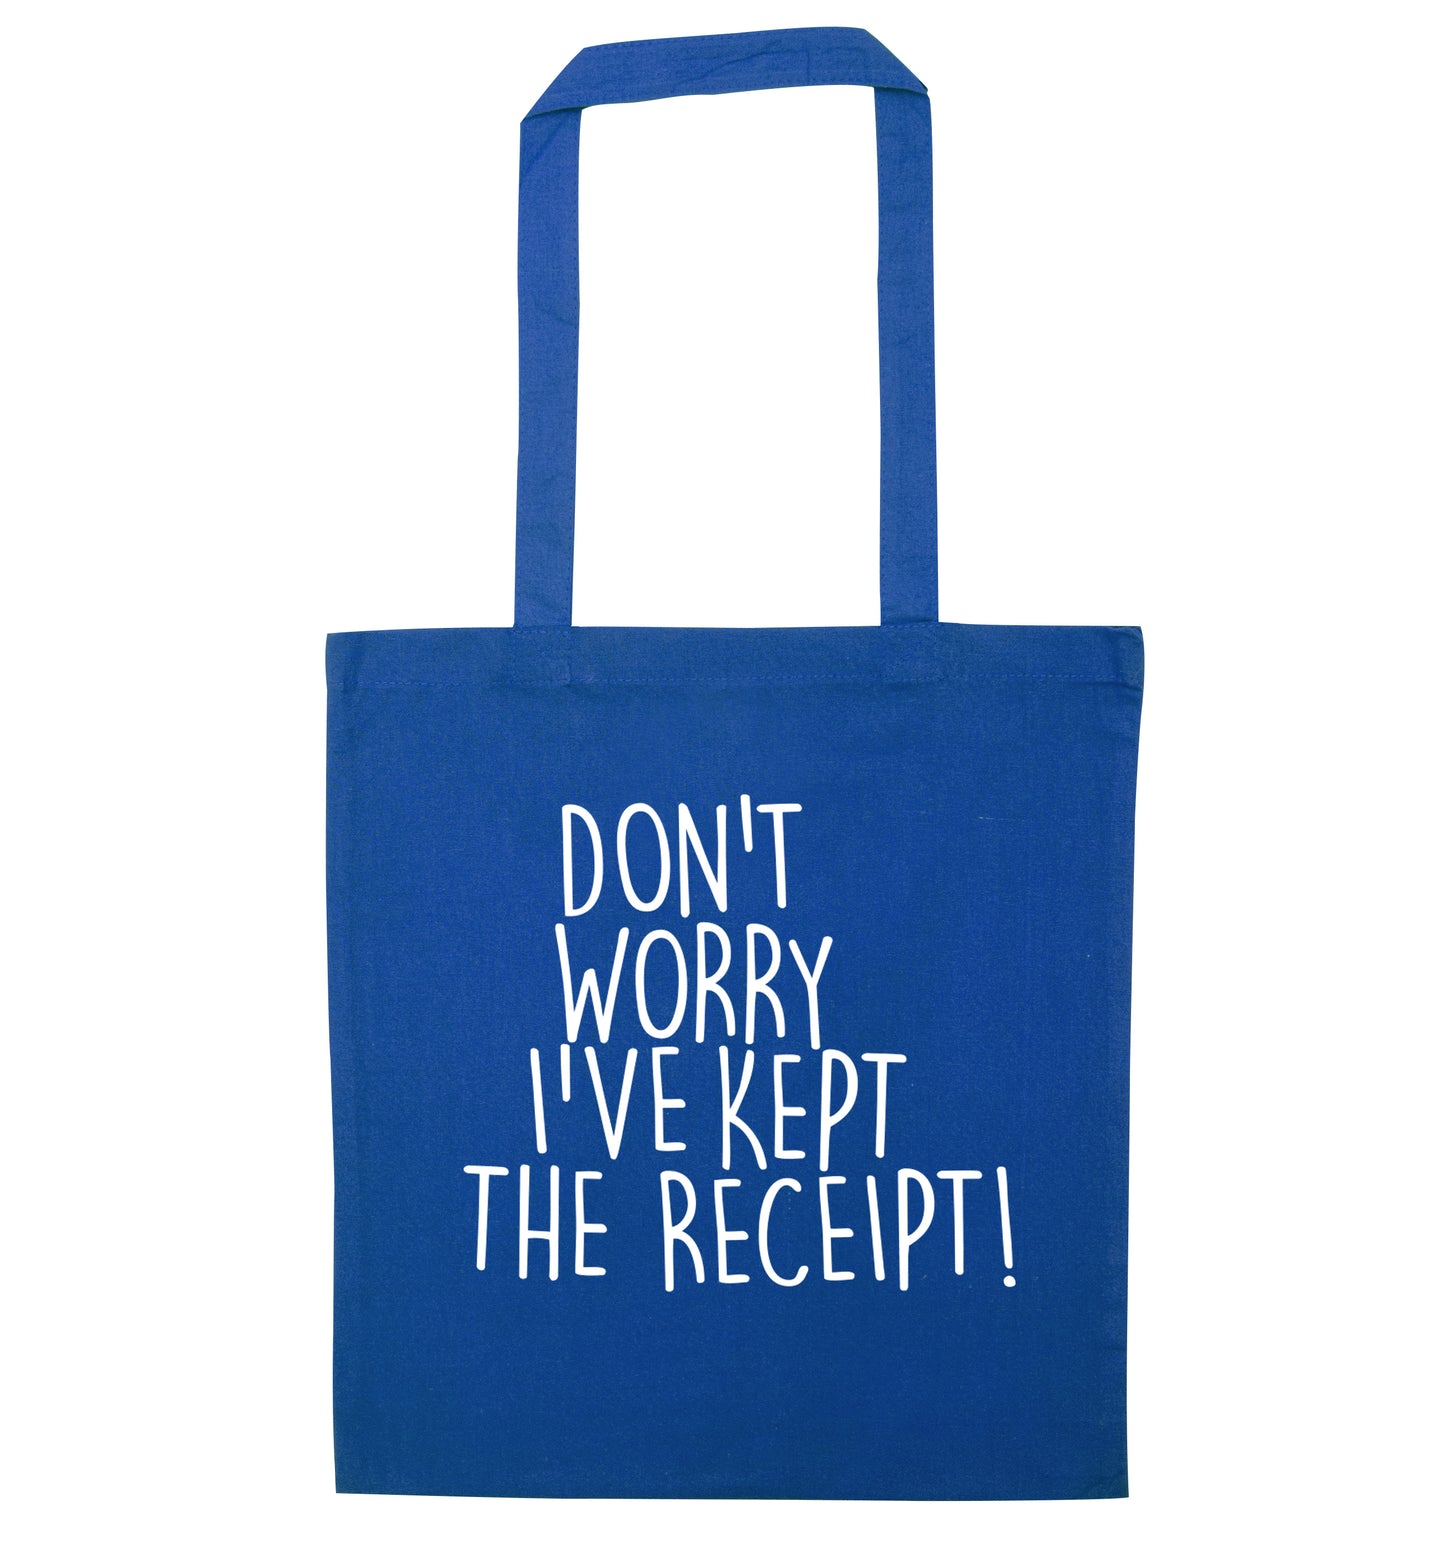 Don't Worry I've Kept the Receipt blue tote bag